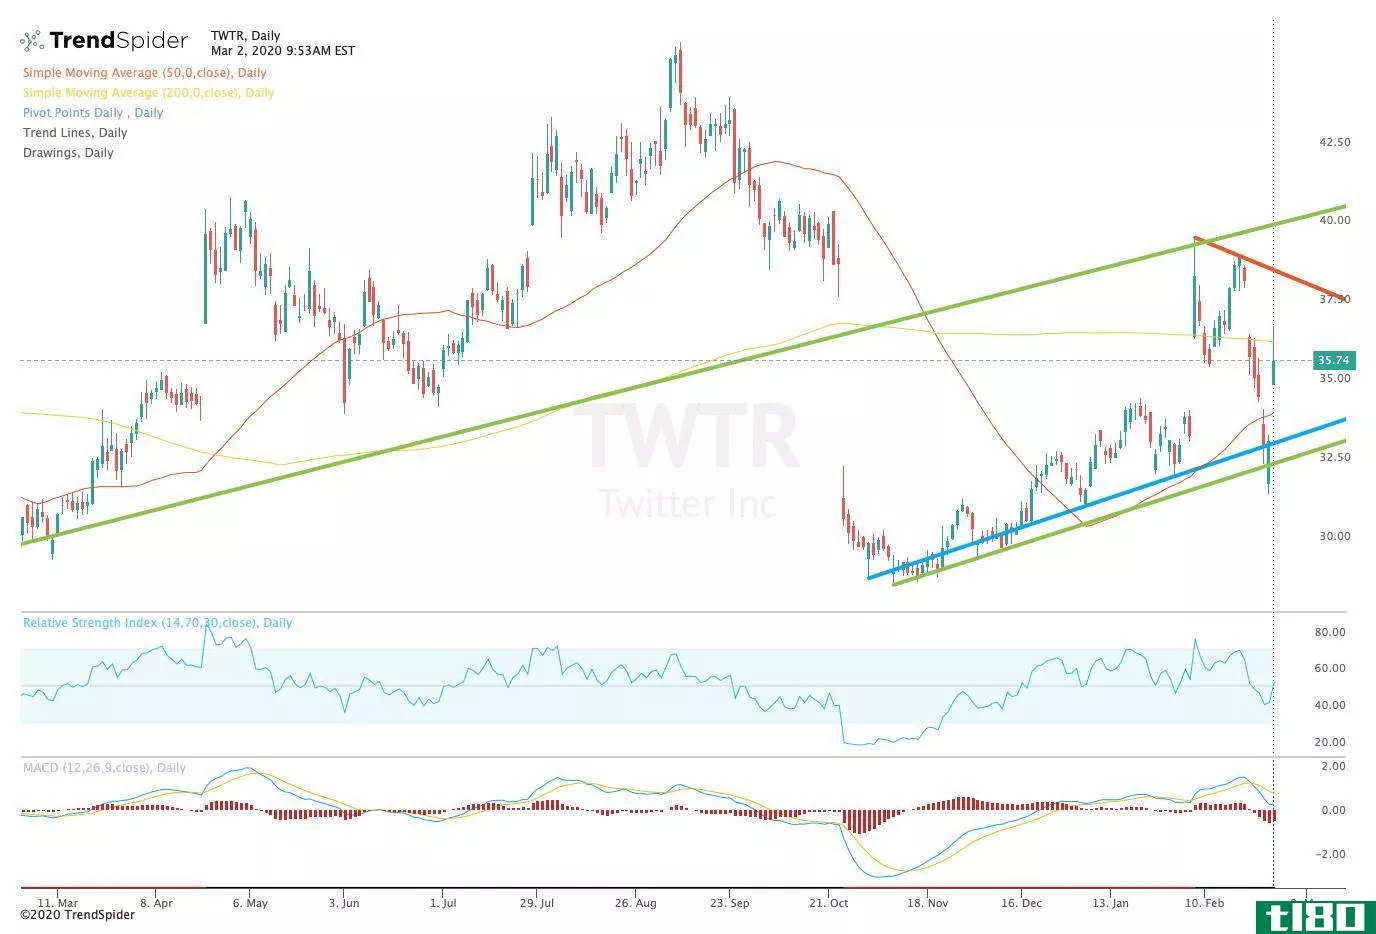 Chart showing the share price performance of Twitter, Inc. (TWTR)